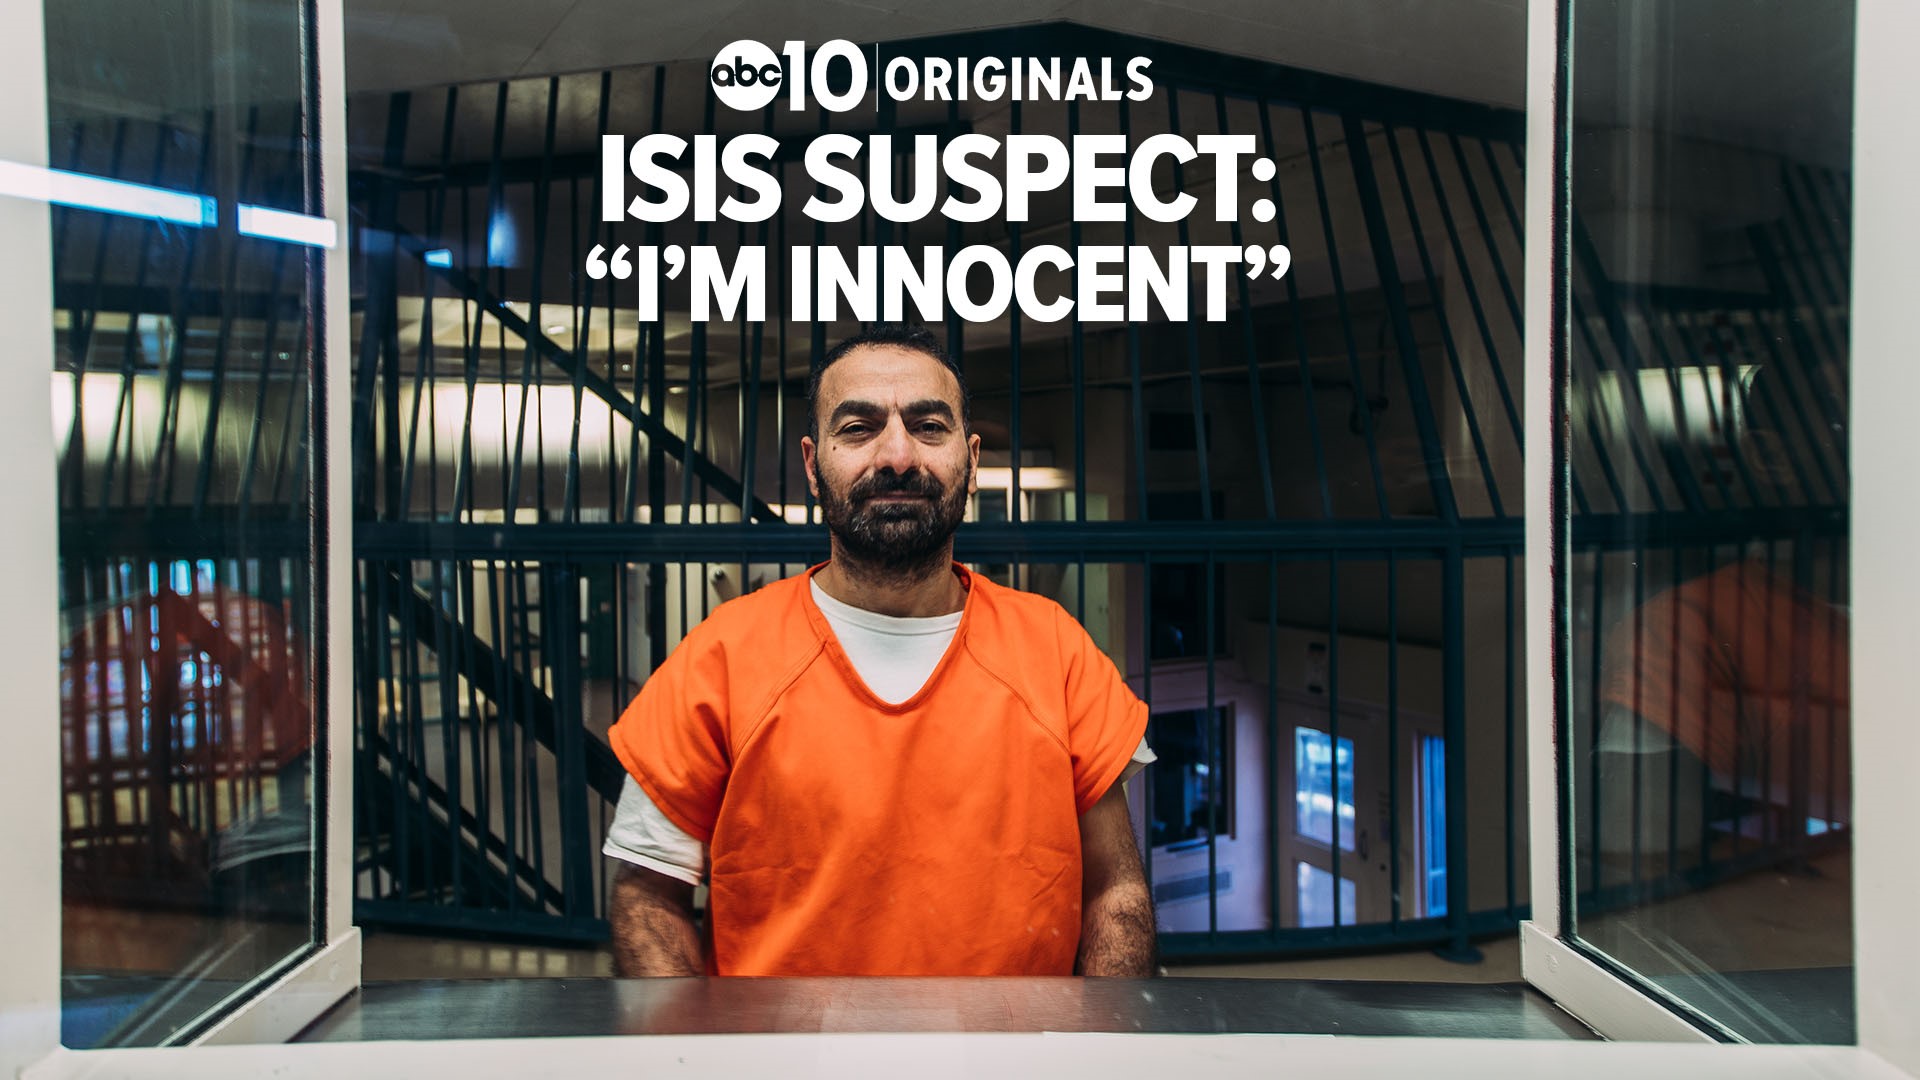 Omar Ameen is a suspect in the 2014 killing of an Iraqi police officer. The Iraqi government alleges Ameen has been a member of Al Qaeda and ISIS.